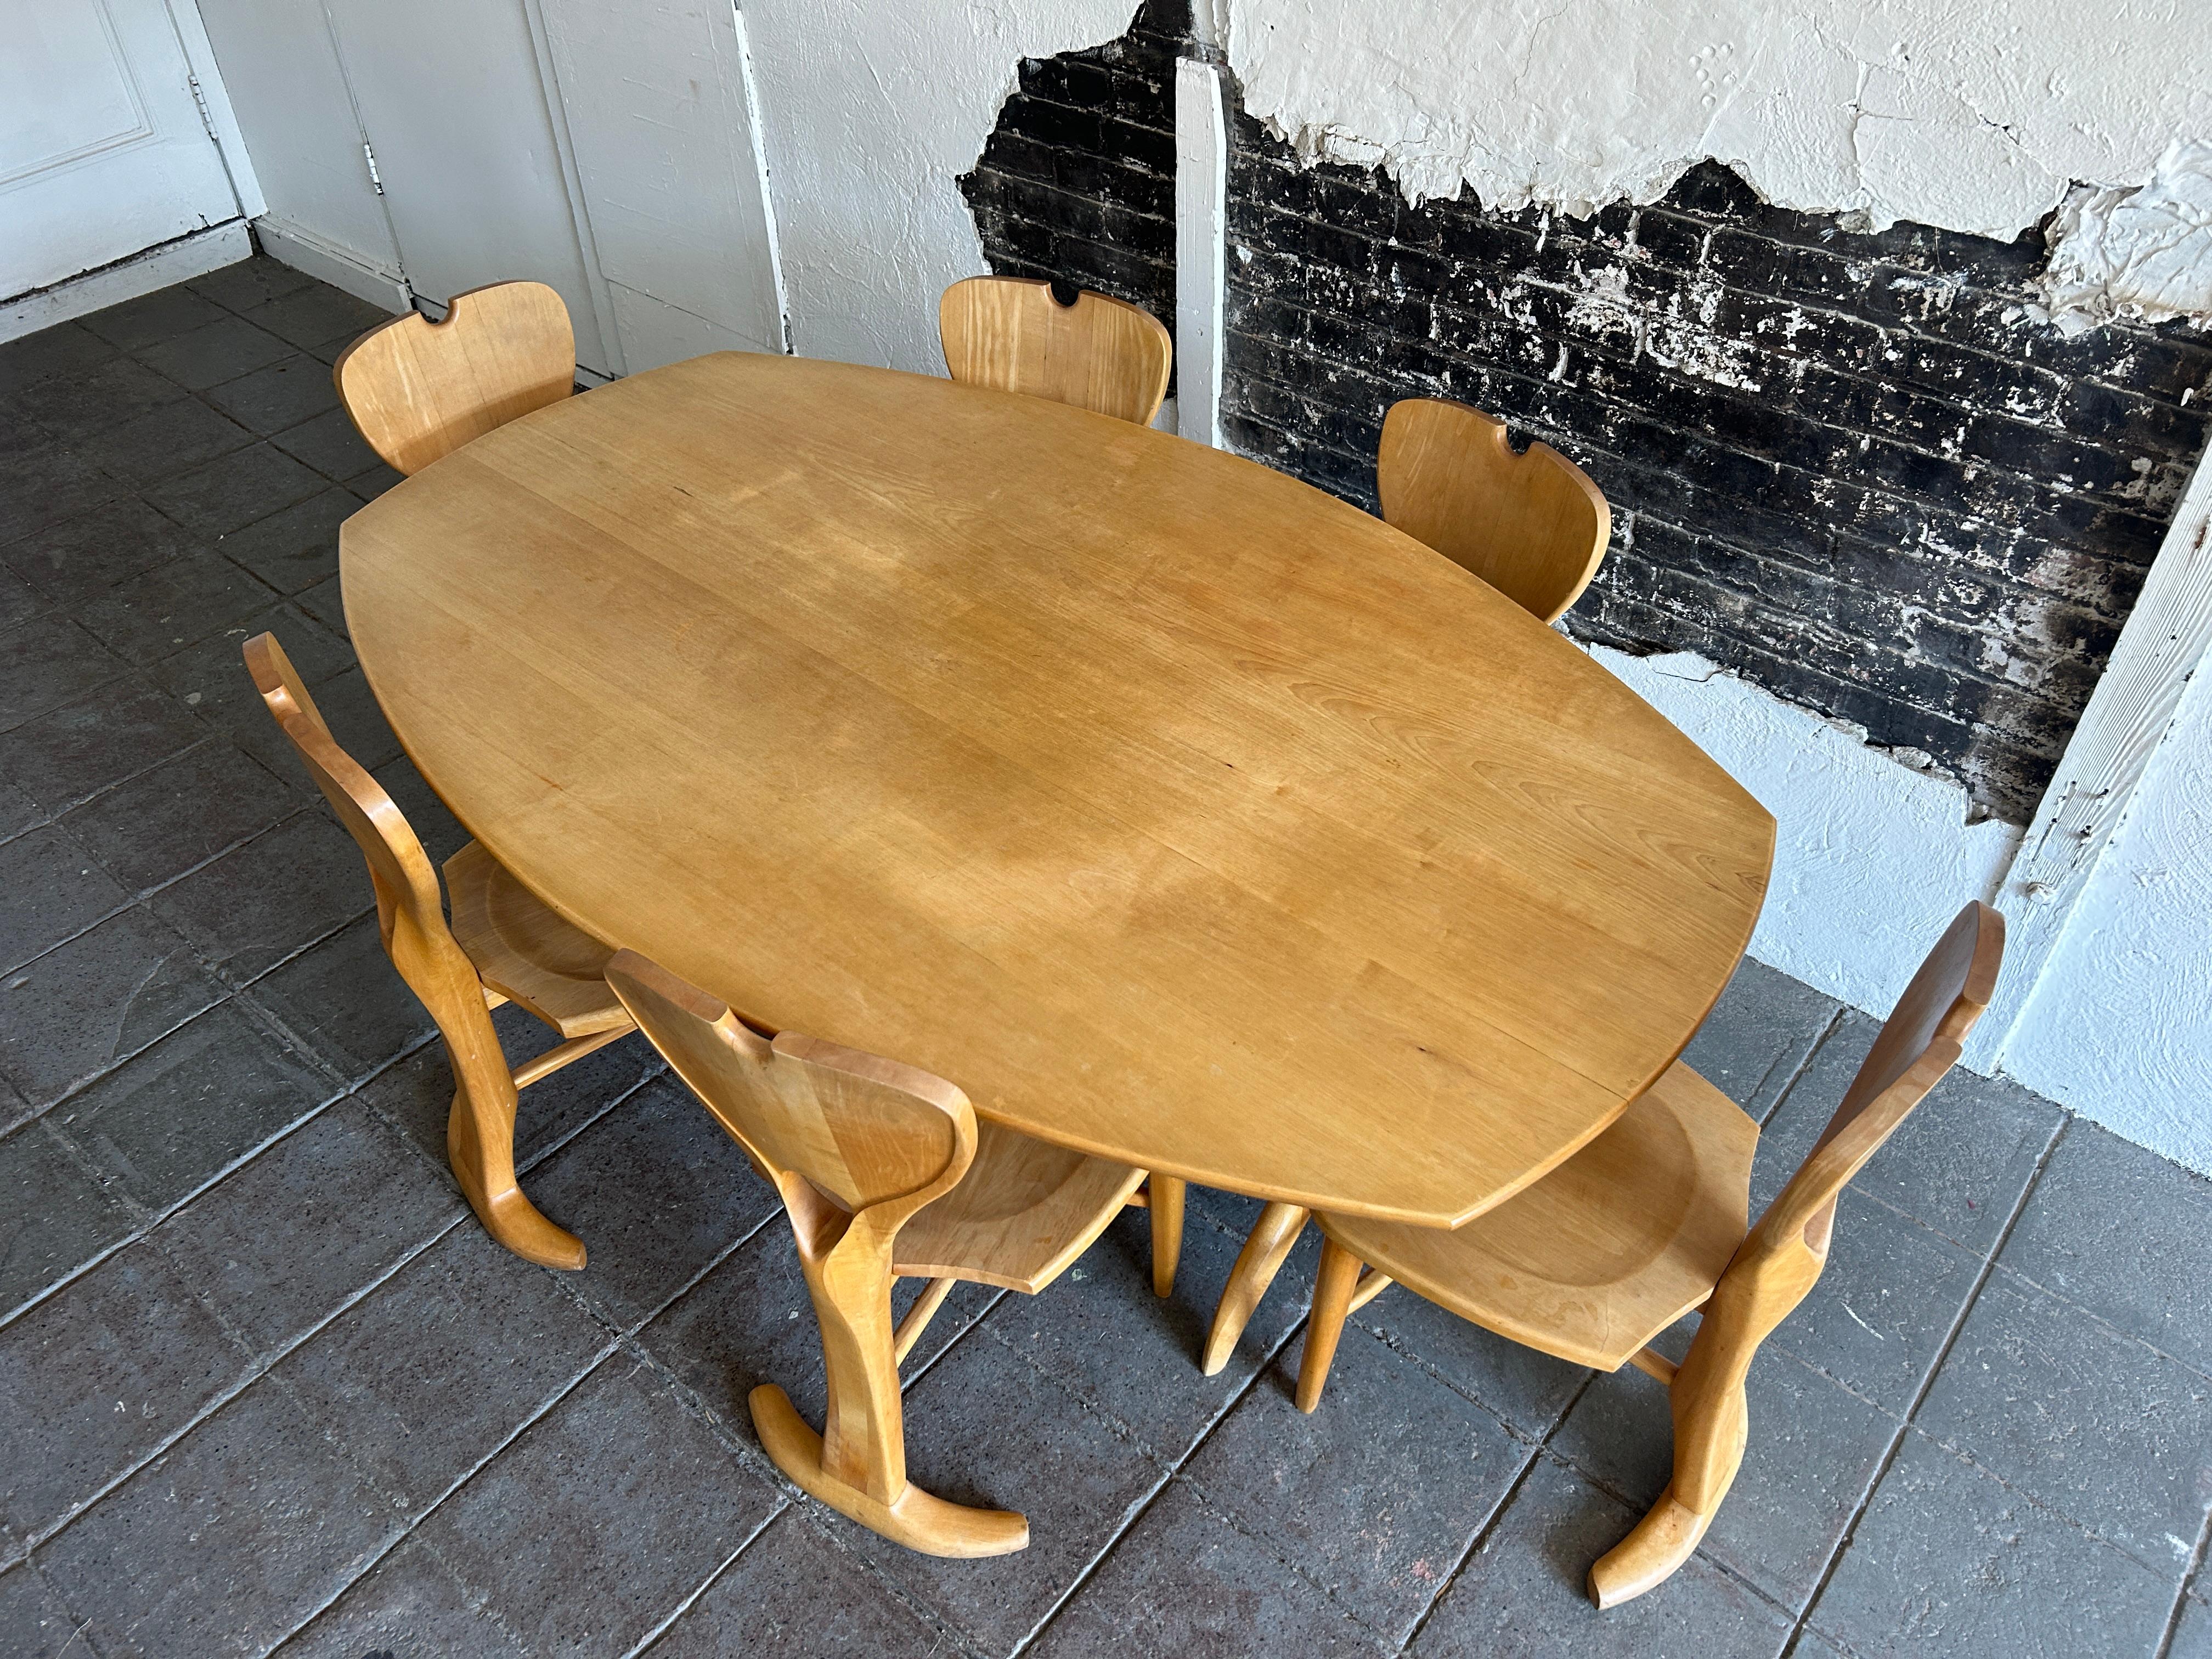 One of a kind American Studio craft birch blonde dining table with 6 chairs. Beautiful carved wood dining chairs and dining table. The oval style shaped dining table with detailed sculptured base all solid blonde birch wood. The (6) matching dining